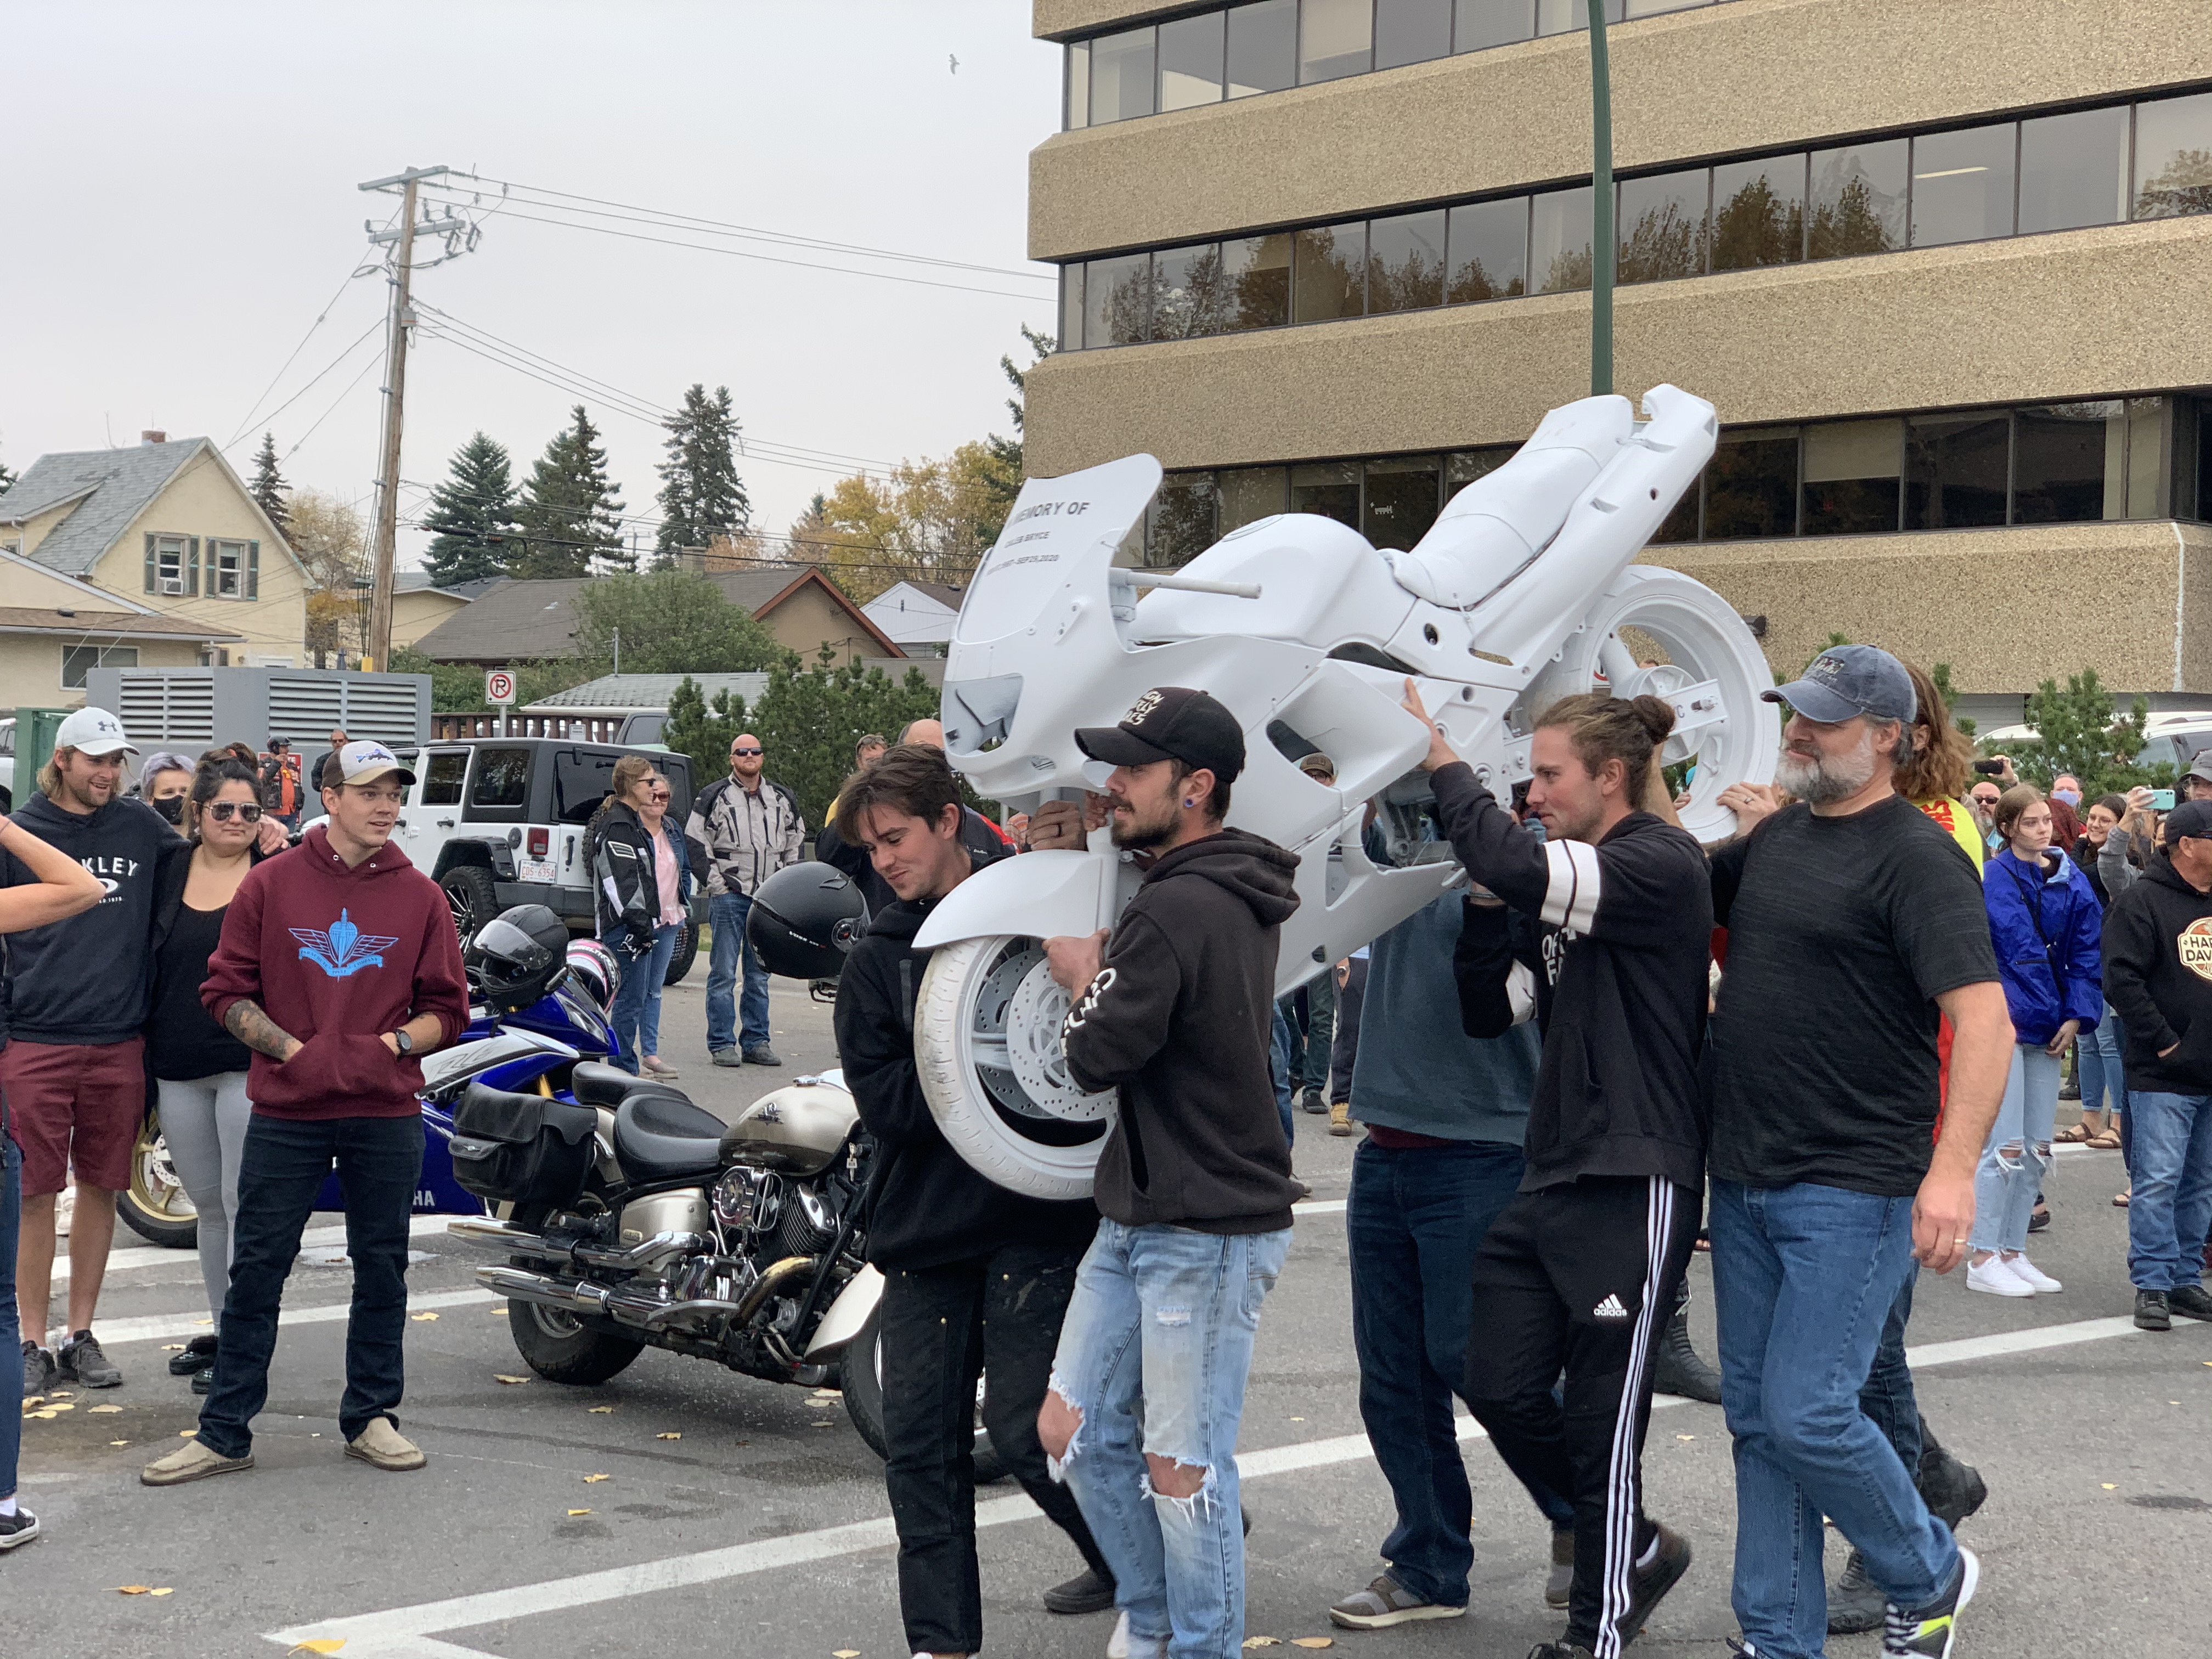 Calgary Ghost Ride pays respect to fallen biker who died in Deerfoot collision